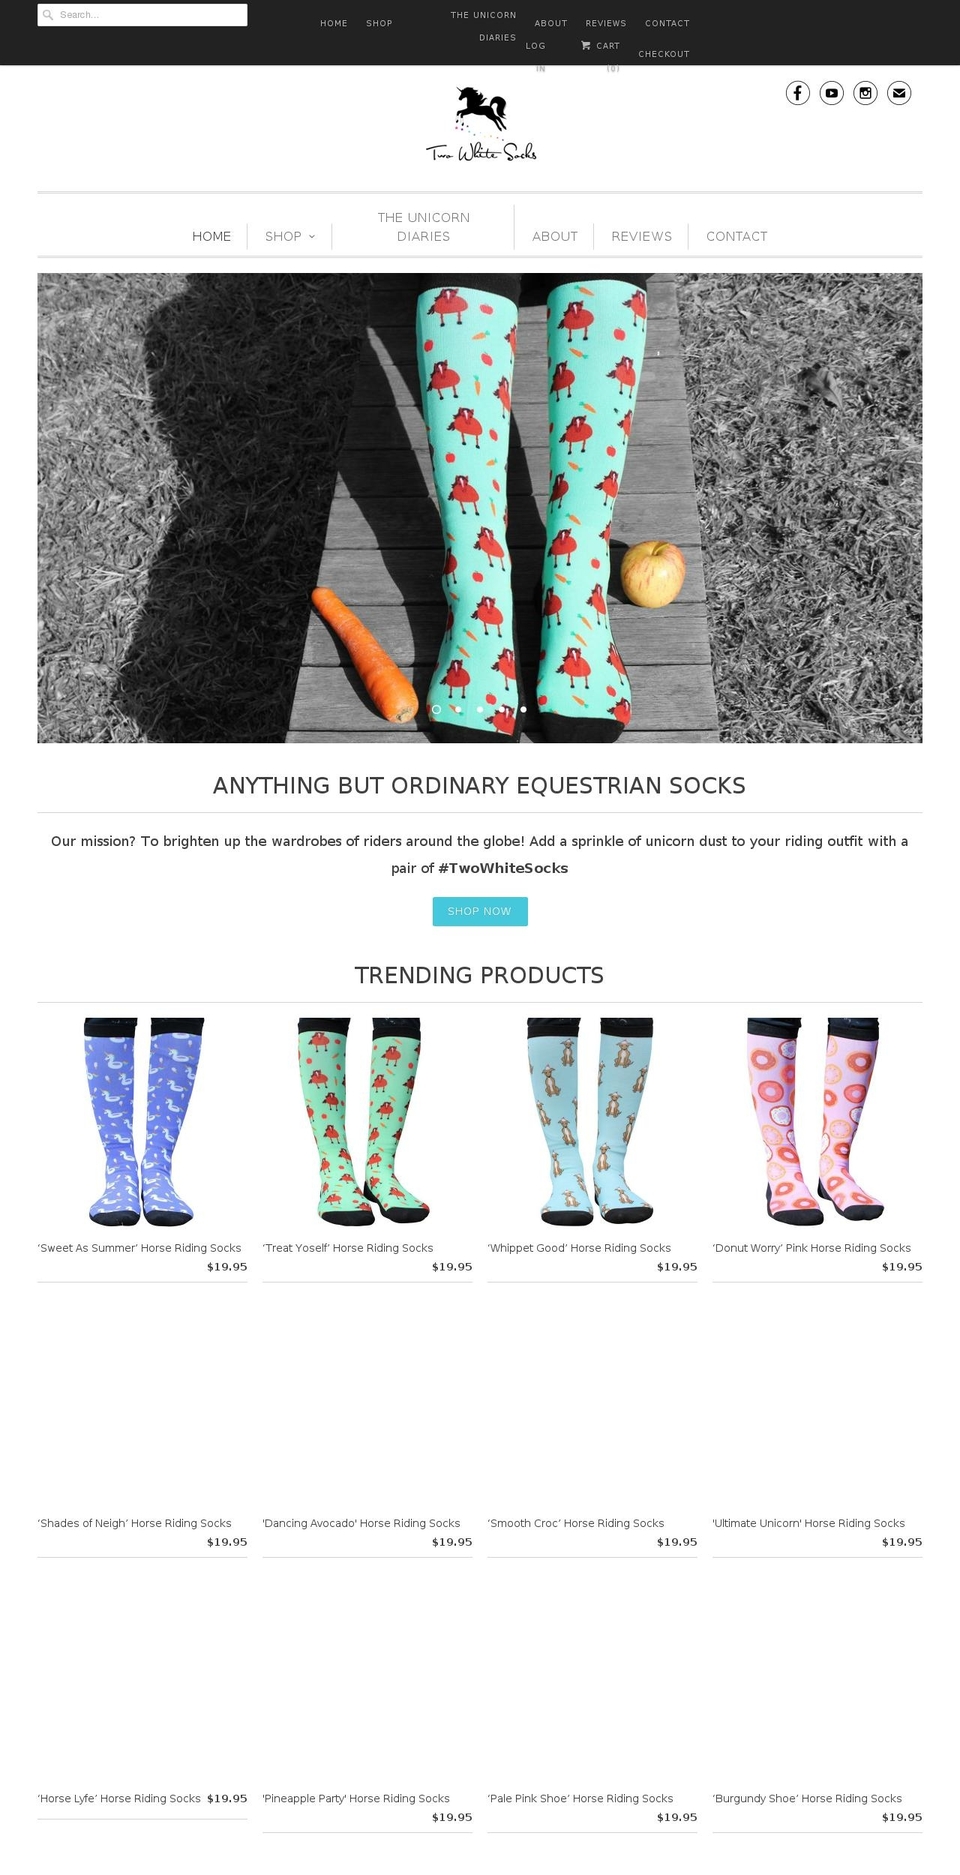 OOTS Support Shopify theme site example twowhitesocks.com